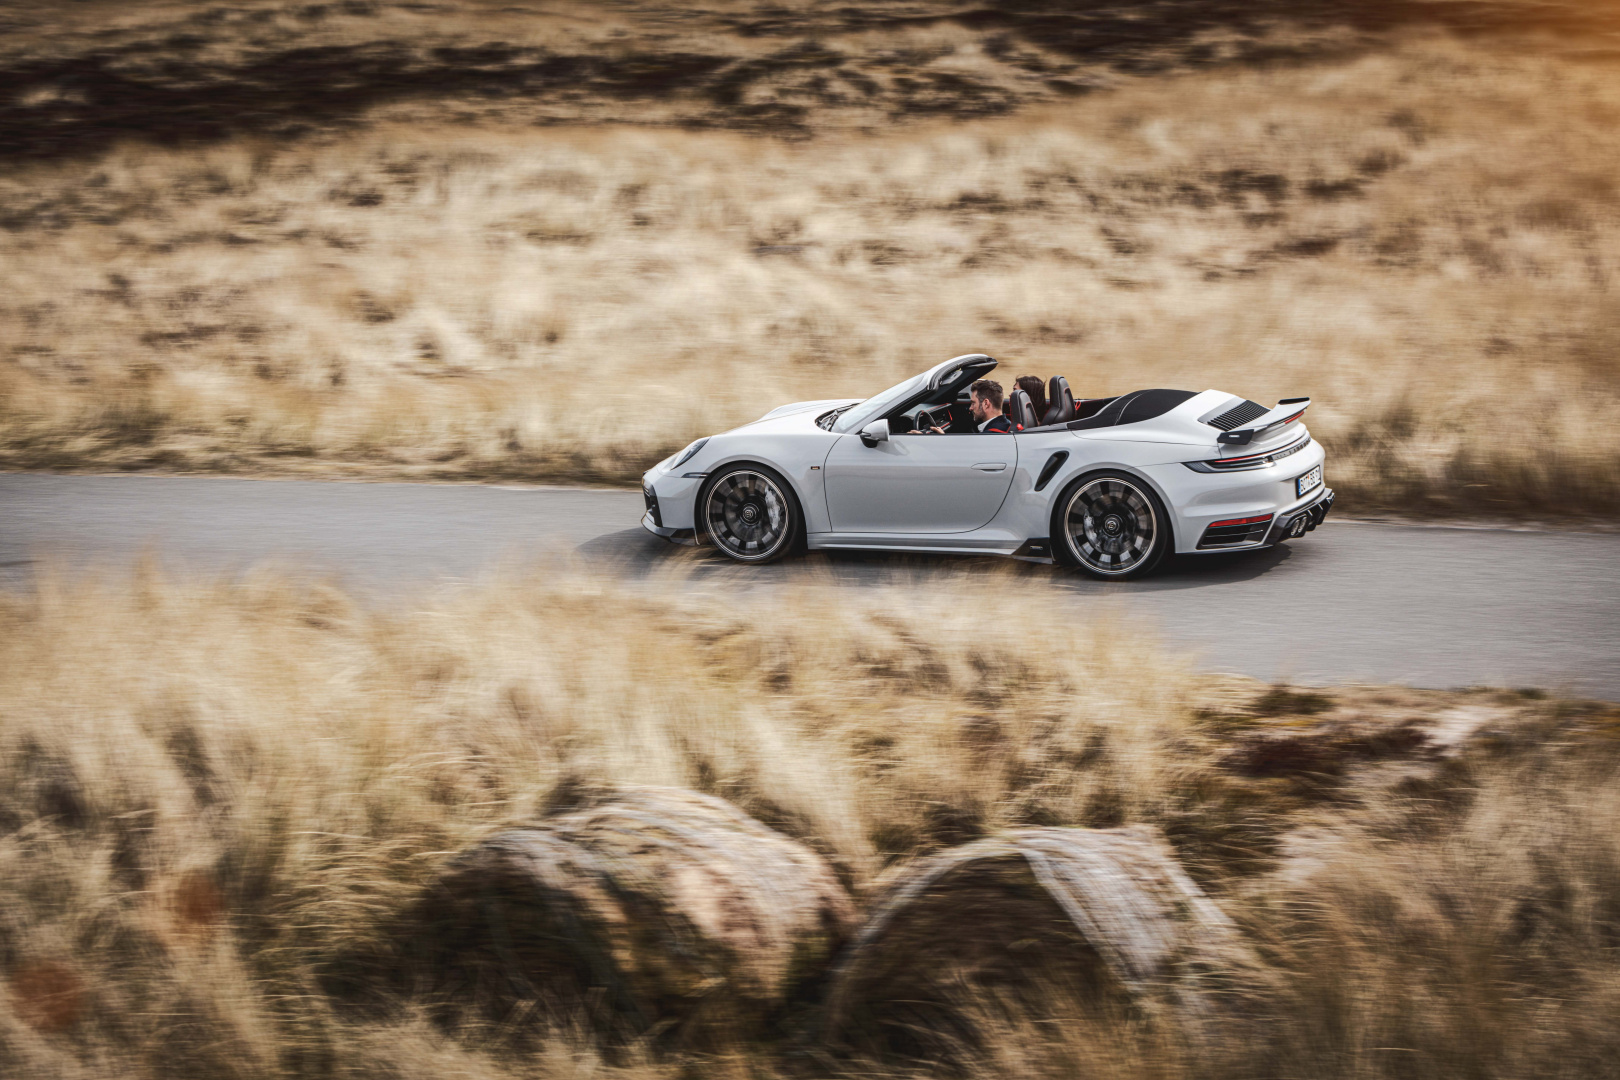 SMALL_BRABUS 820 based on 911 Turbo S Cabriolet Outdoor (110)